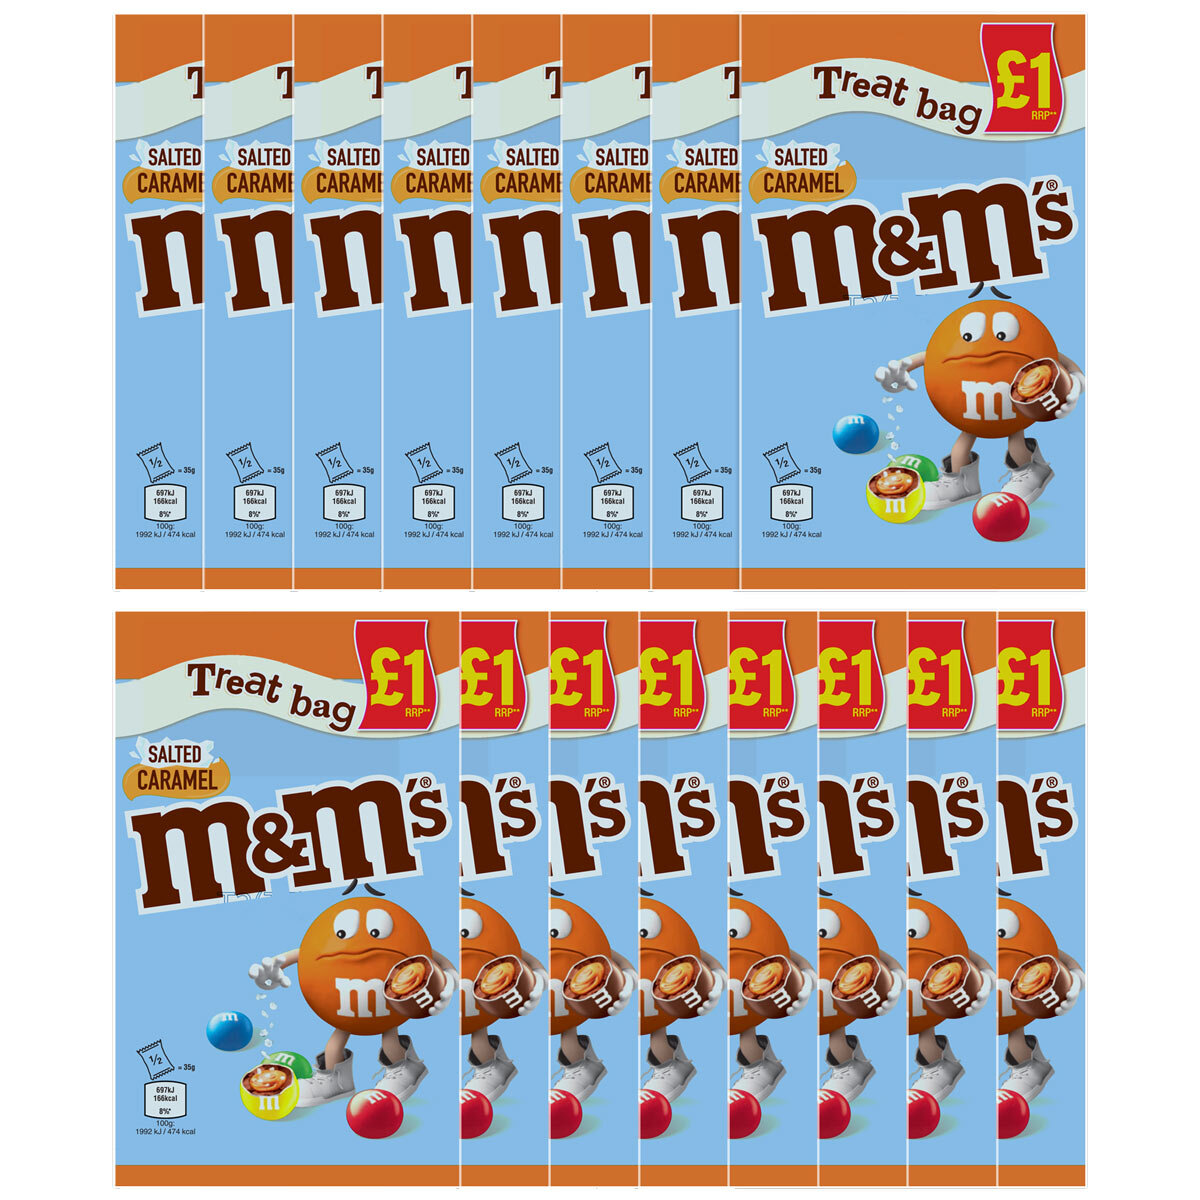 Enjoy our wide range of M&M's Chocolate Treat Bag 82g M&M's items